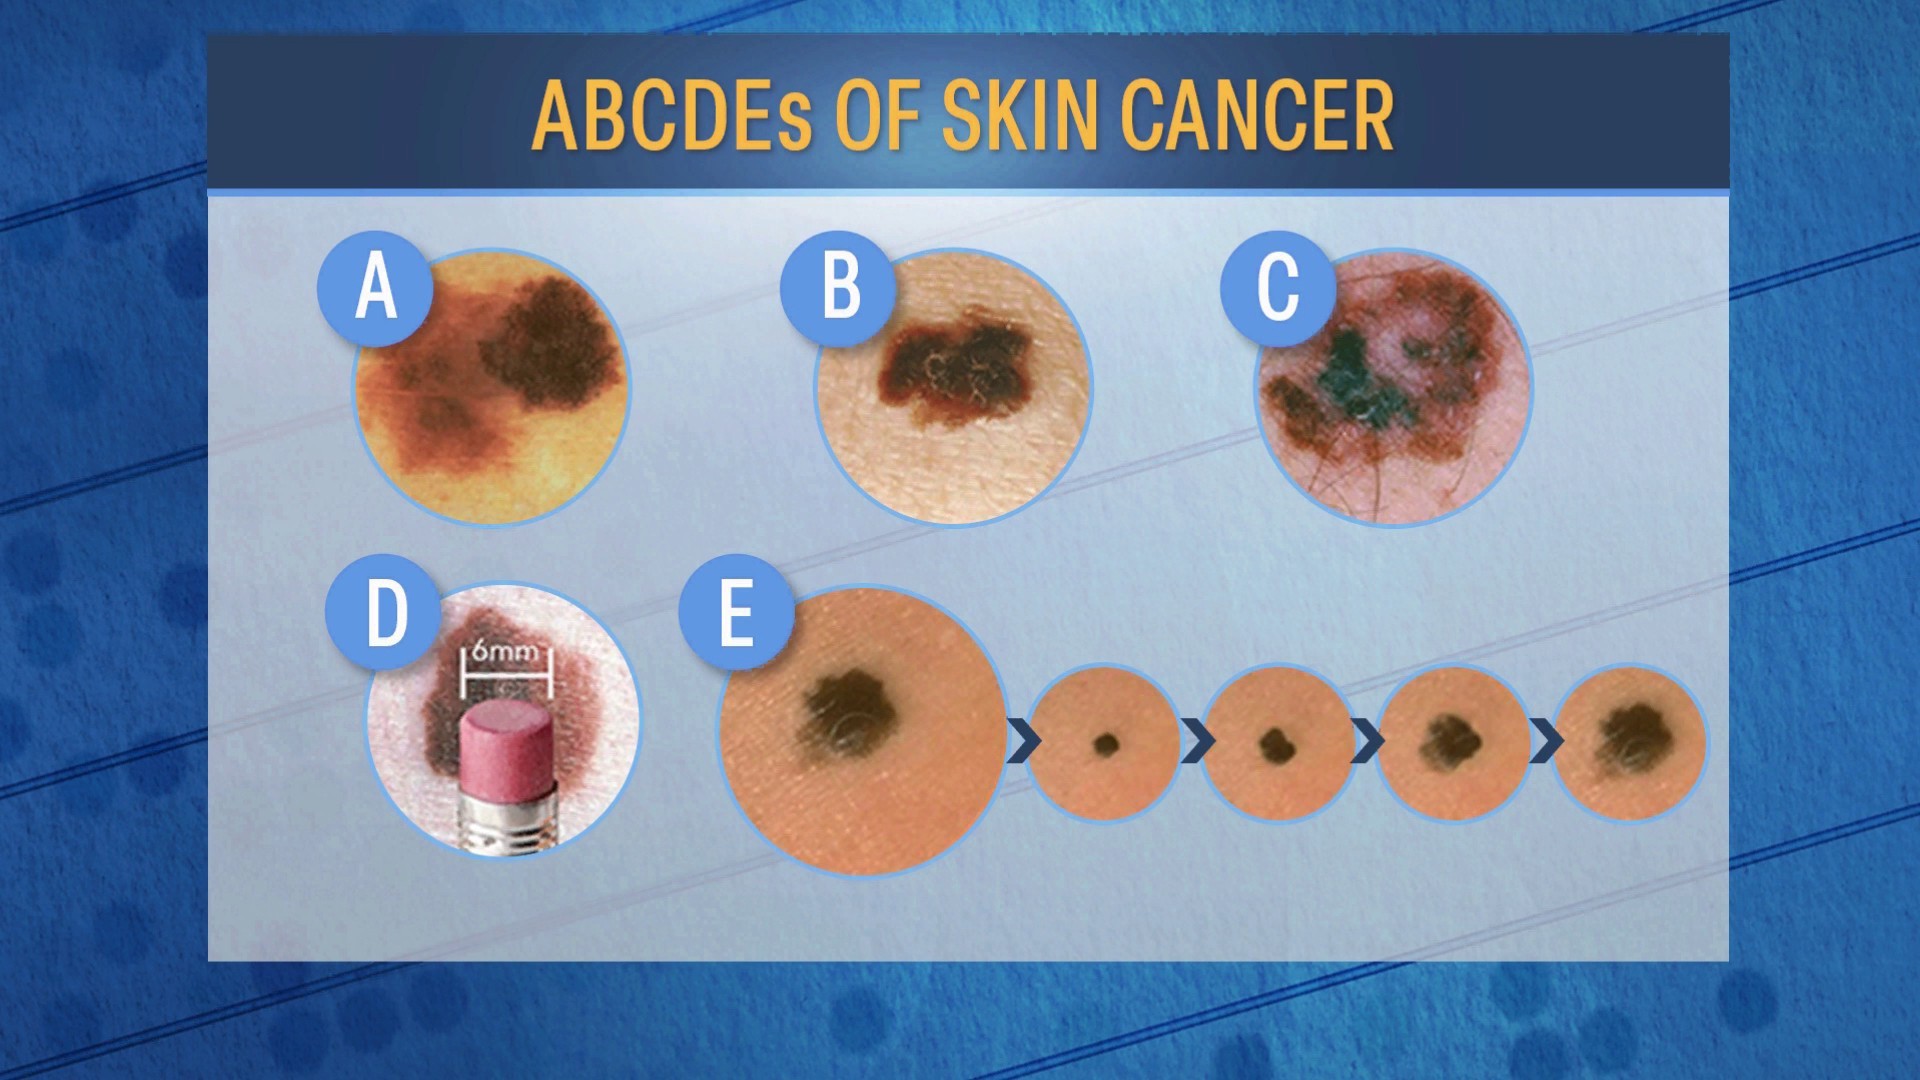 What to know about skin cancer: Self-exams, safety tips, more